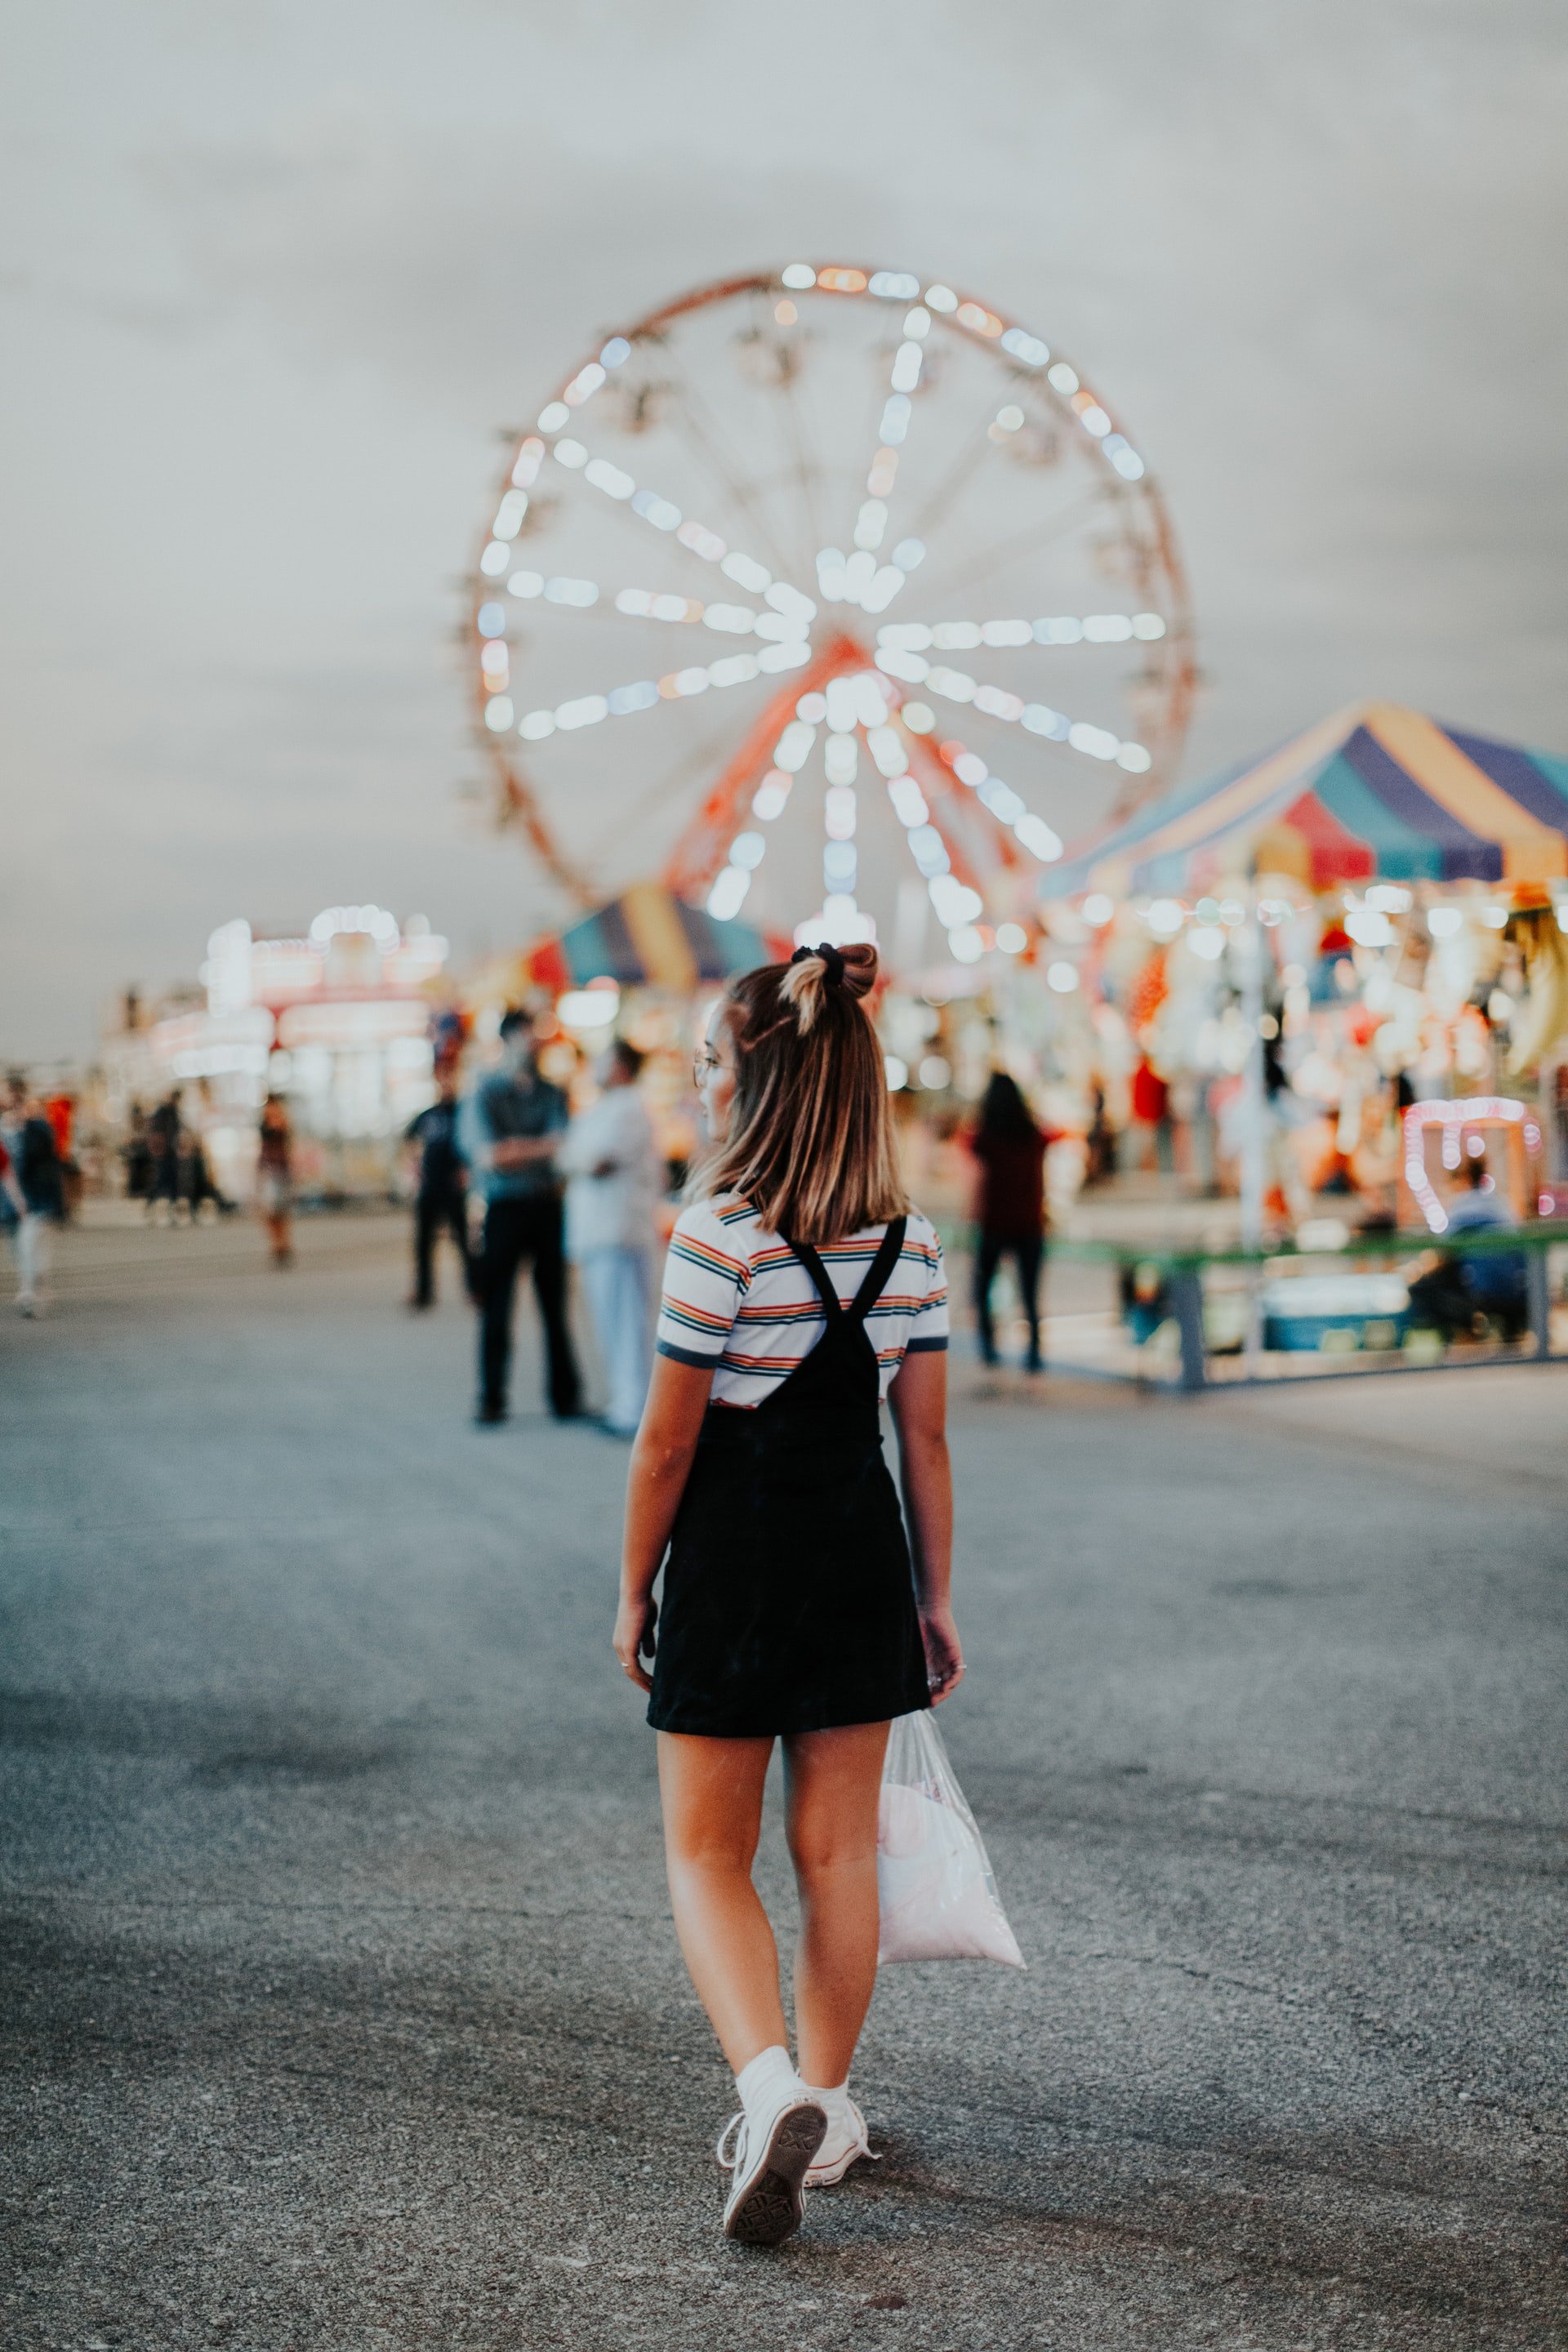 They went to Six Flags the following day and had tons of fun. | Source: Unsplash